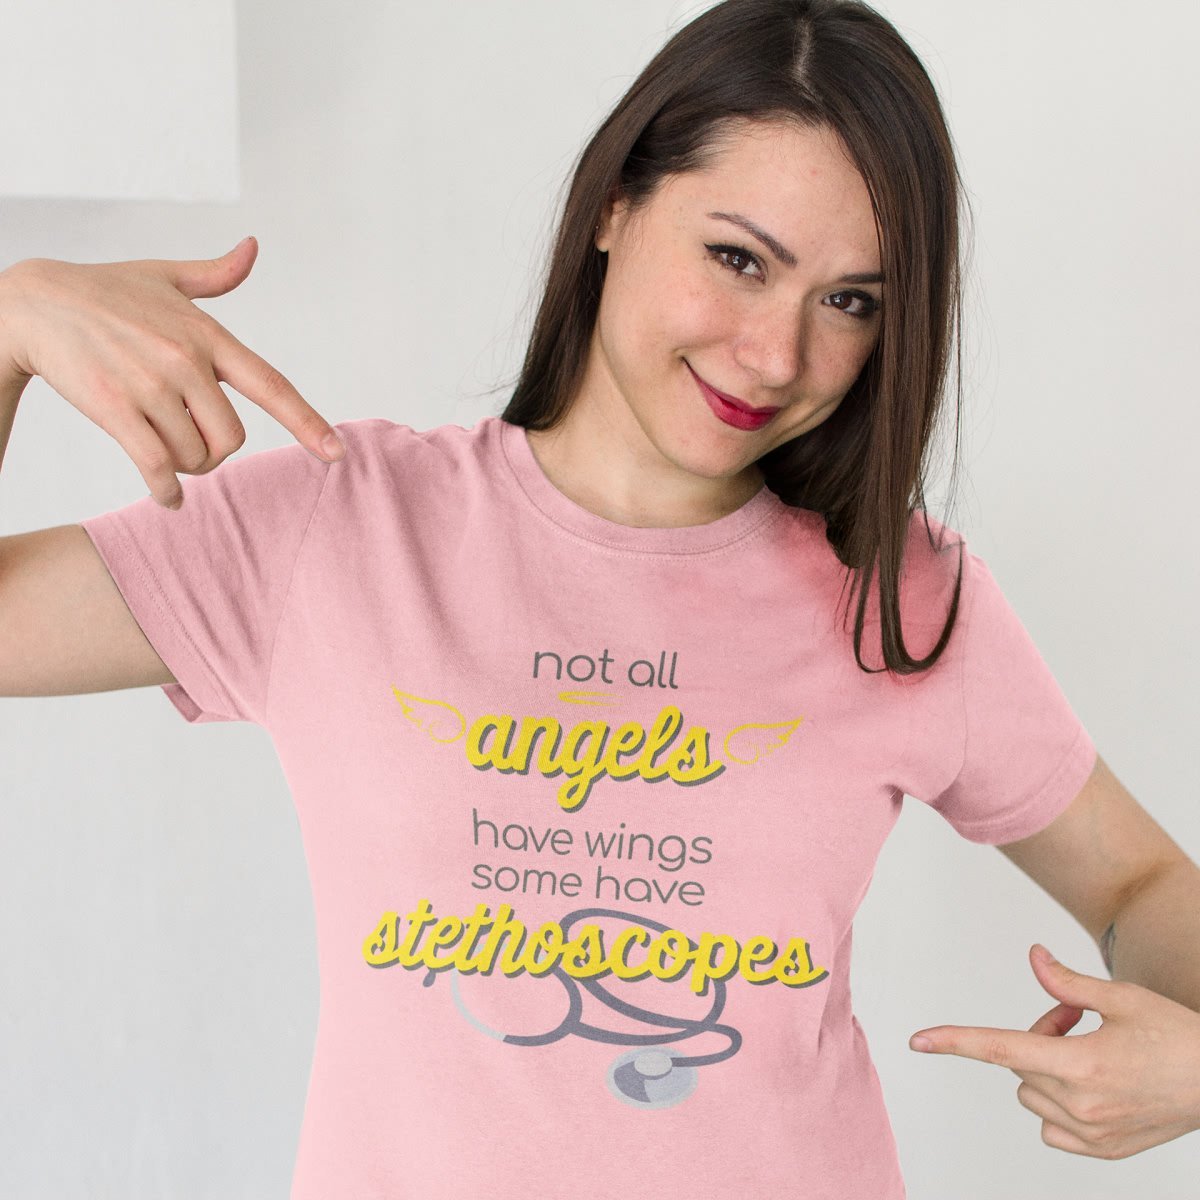 Not All Angels Have Wings Some Have Stethoscope T Shirt - 22-2474-4329825-12563